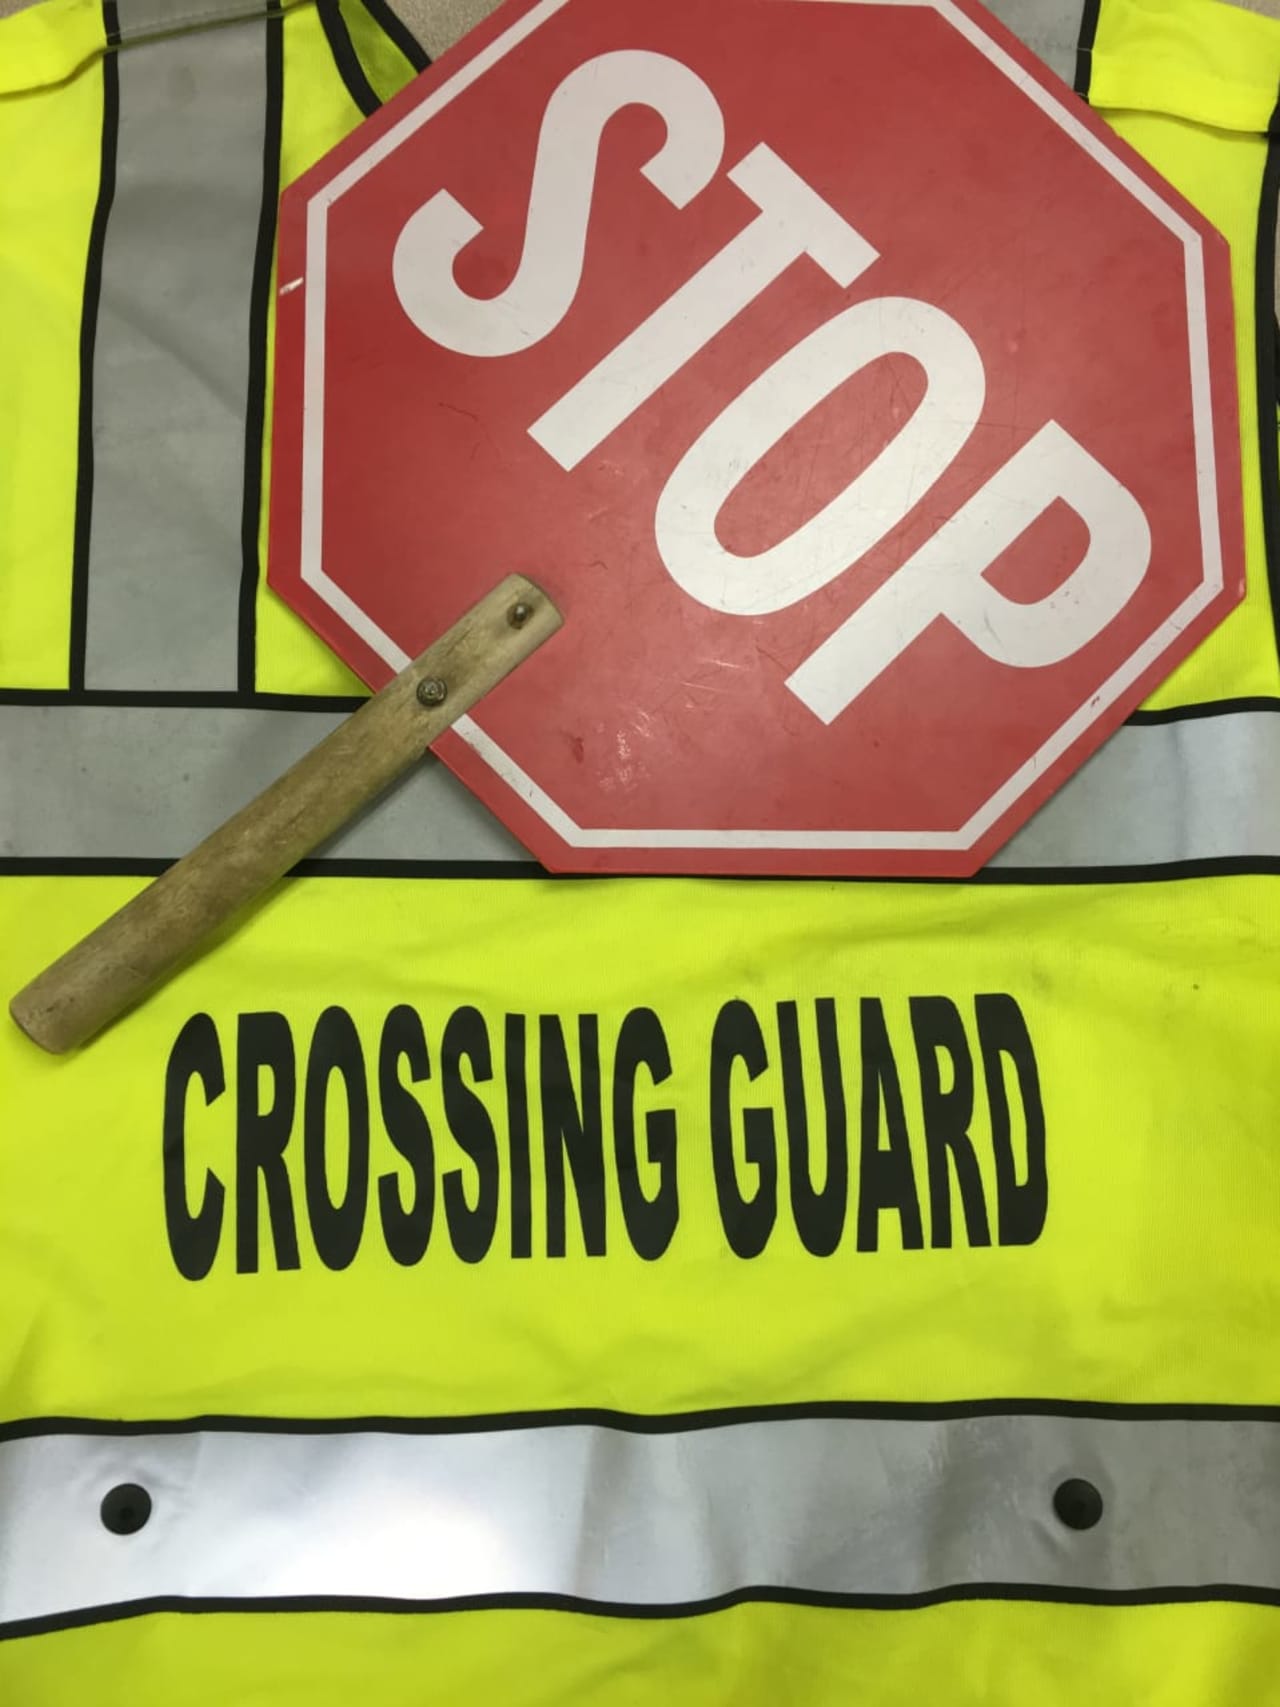 Crossing guards will be out in full force beginning Wednesday and continuing through the school year.